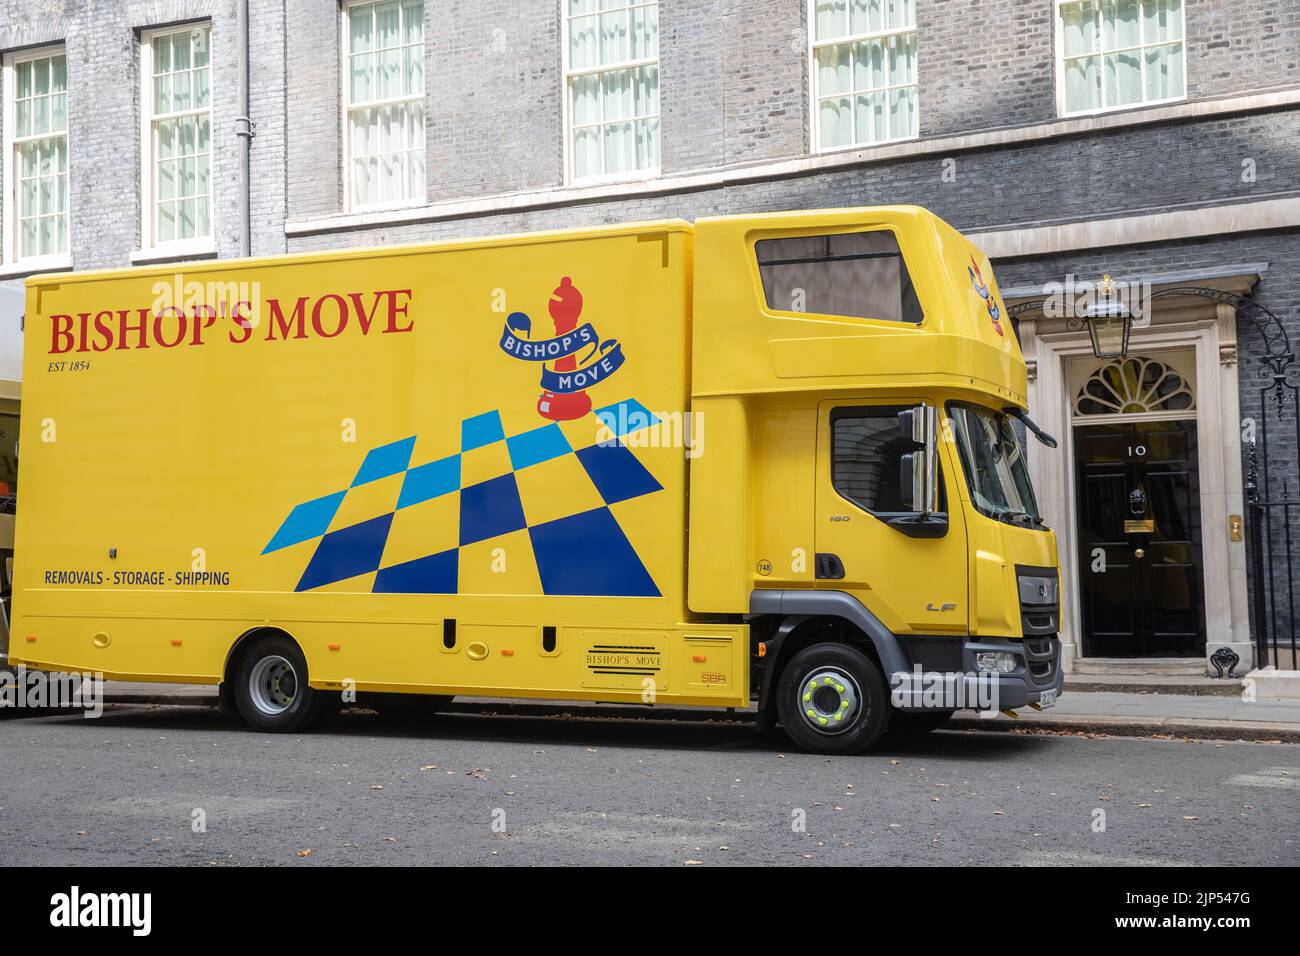 Removal Vans Outside 10 Downing Street as outgoing PM Boris Johnson moves out of his flat at number 12 on 15th August 2022 Stock Photo